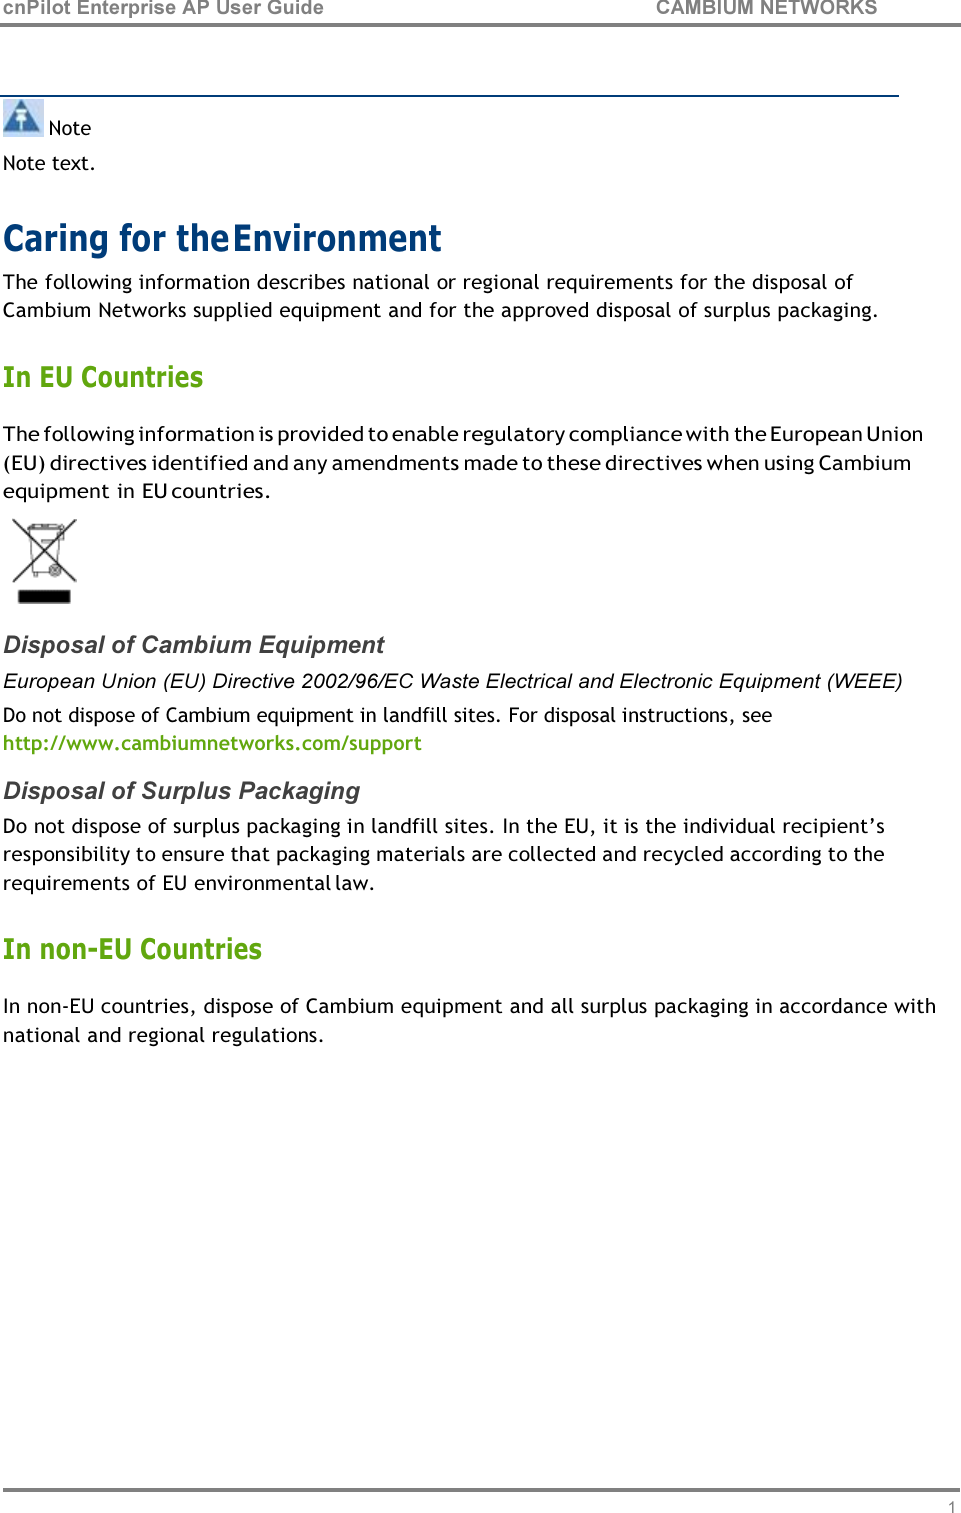 13 cnPilot Enterprise AP User Guide CAMBIUM NETWORKS      Note Note text.  Caring for the Environment The following information describes national or regional requirements for the disposal of Cambium Networks supplied equipment and for the approved disposal of surplus packaging.  In EU Countries The following information is provided to enable regulatory compliance with the European Union (EU) directives identified and any amendments made to these directives when using Cambium equipment in EU countries.  Disposal of Cambium Equipment European Union (EU) Directive 2002/96/EC Waste Electrical and Electronic Equipment (WEEE) Do not dispose of Cambium equipment in landfill sites. For disposal instructions, see http://www.cambiumnetworks.com/support Disposal of Surplus Packaging Do not dispose of surplus packaging in landfill sites. In the EU, it is the individual recipient’s responsibility to ensure that packaging materials are collected and recycled according to the requirements of EU environmental law.  In non-EU Countries In non-EU countries, dispose of Cambium equipment and all surplus packaging in accordance with national and regional regulations. 